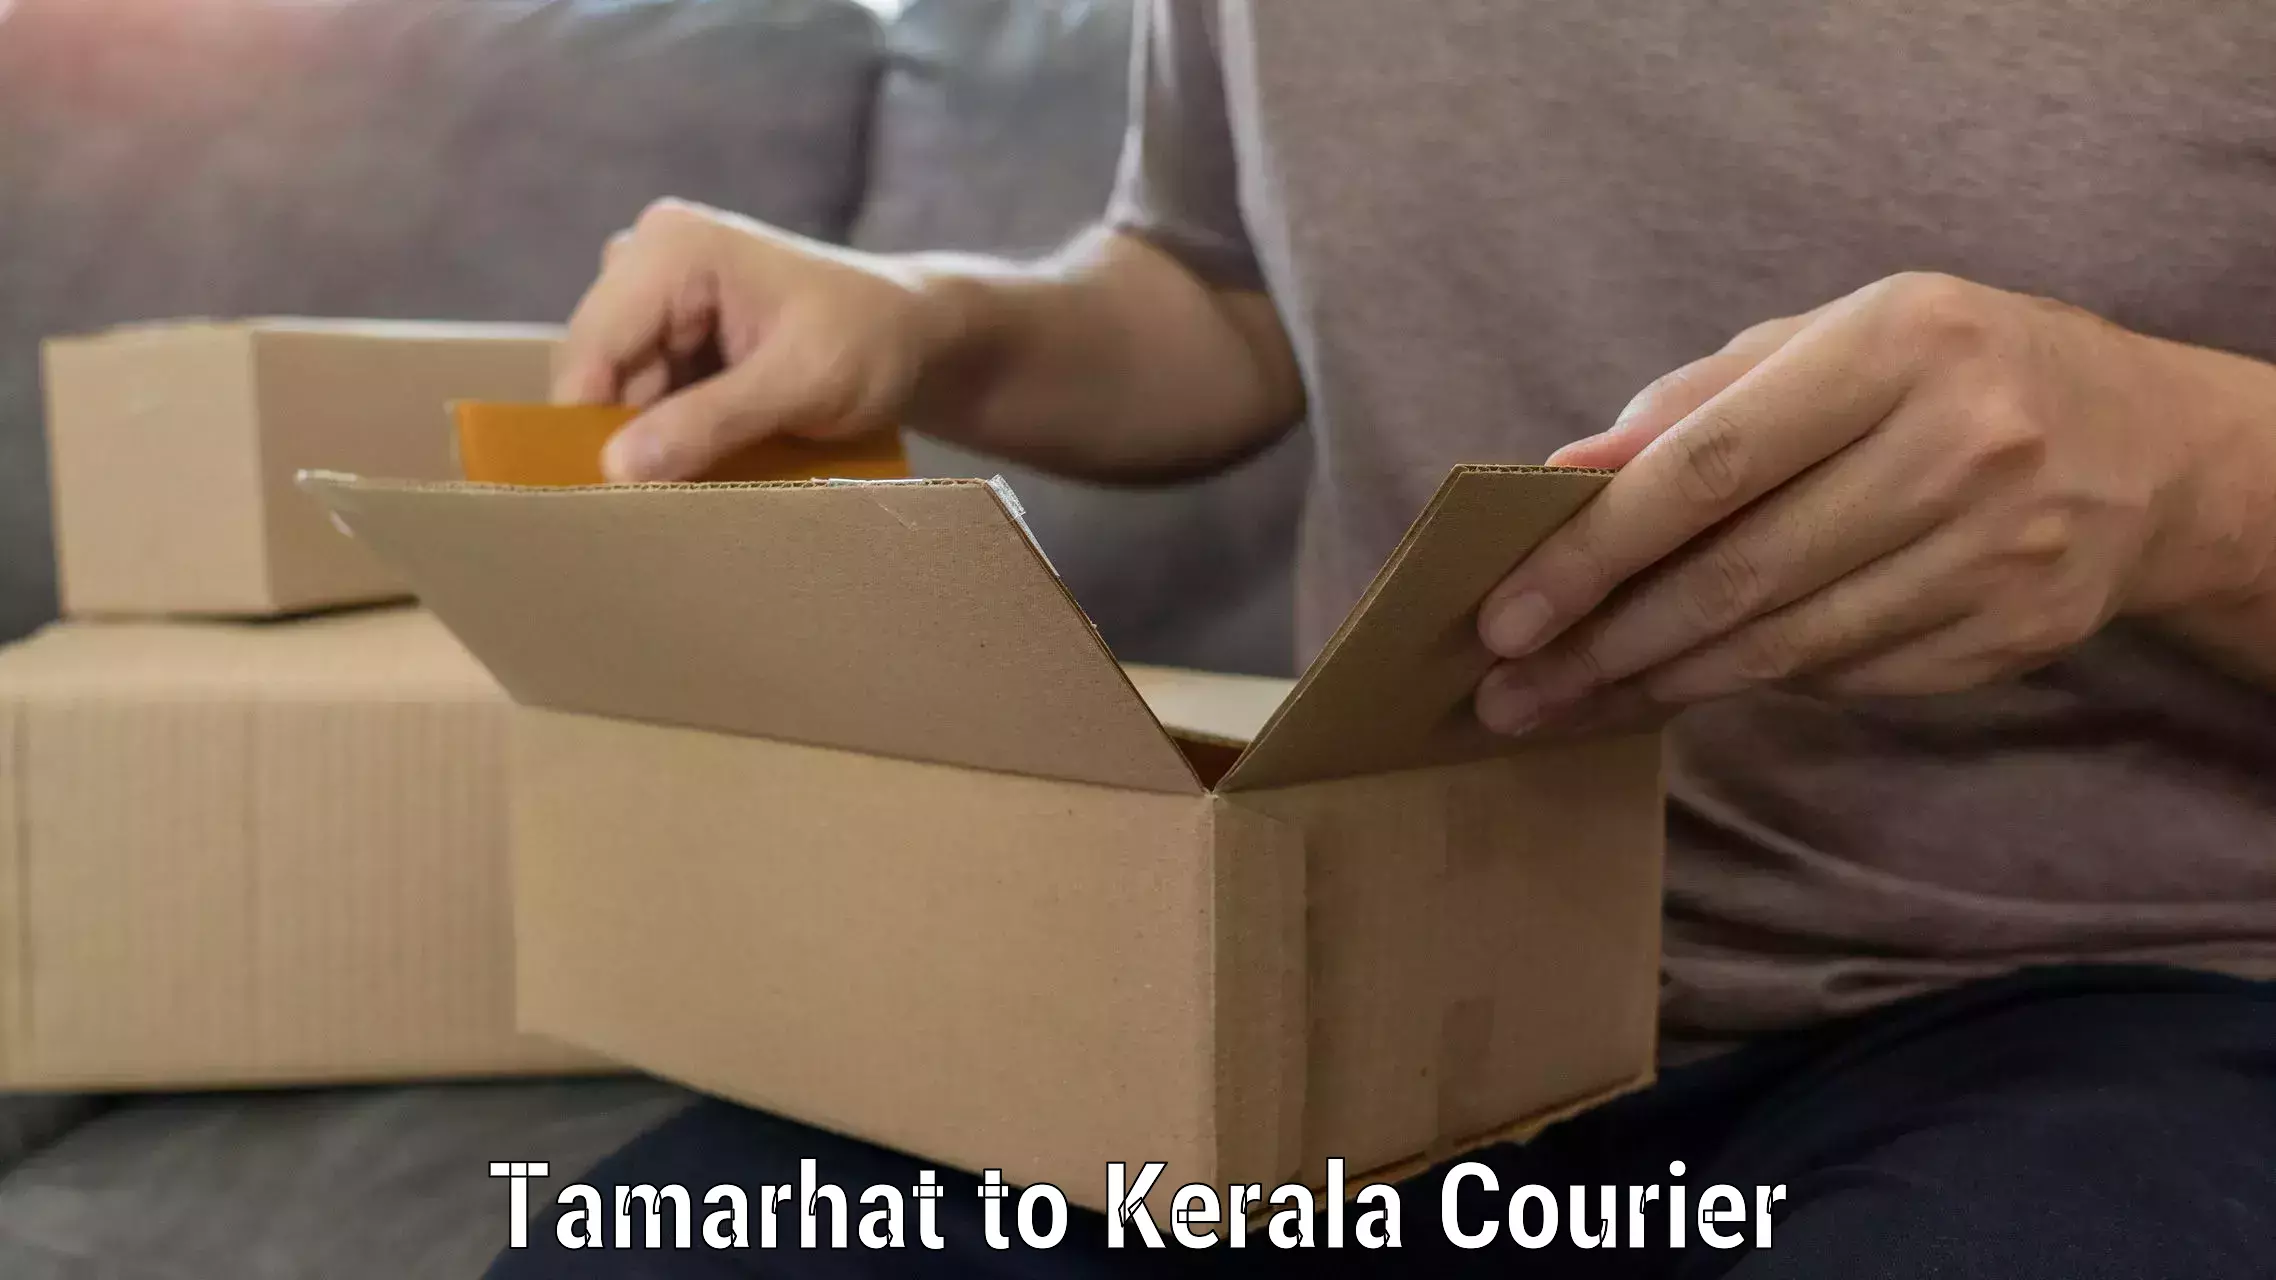 Quality relocation assistance Tamarhat to Cochin University of Science and Technology